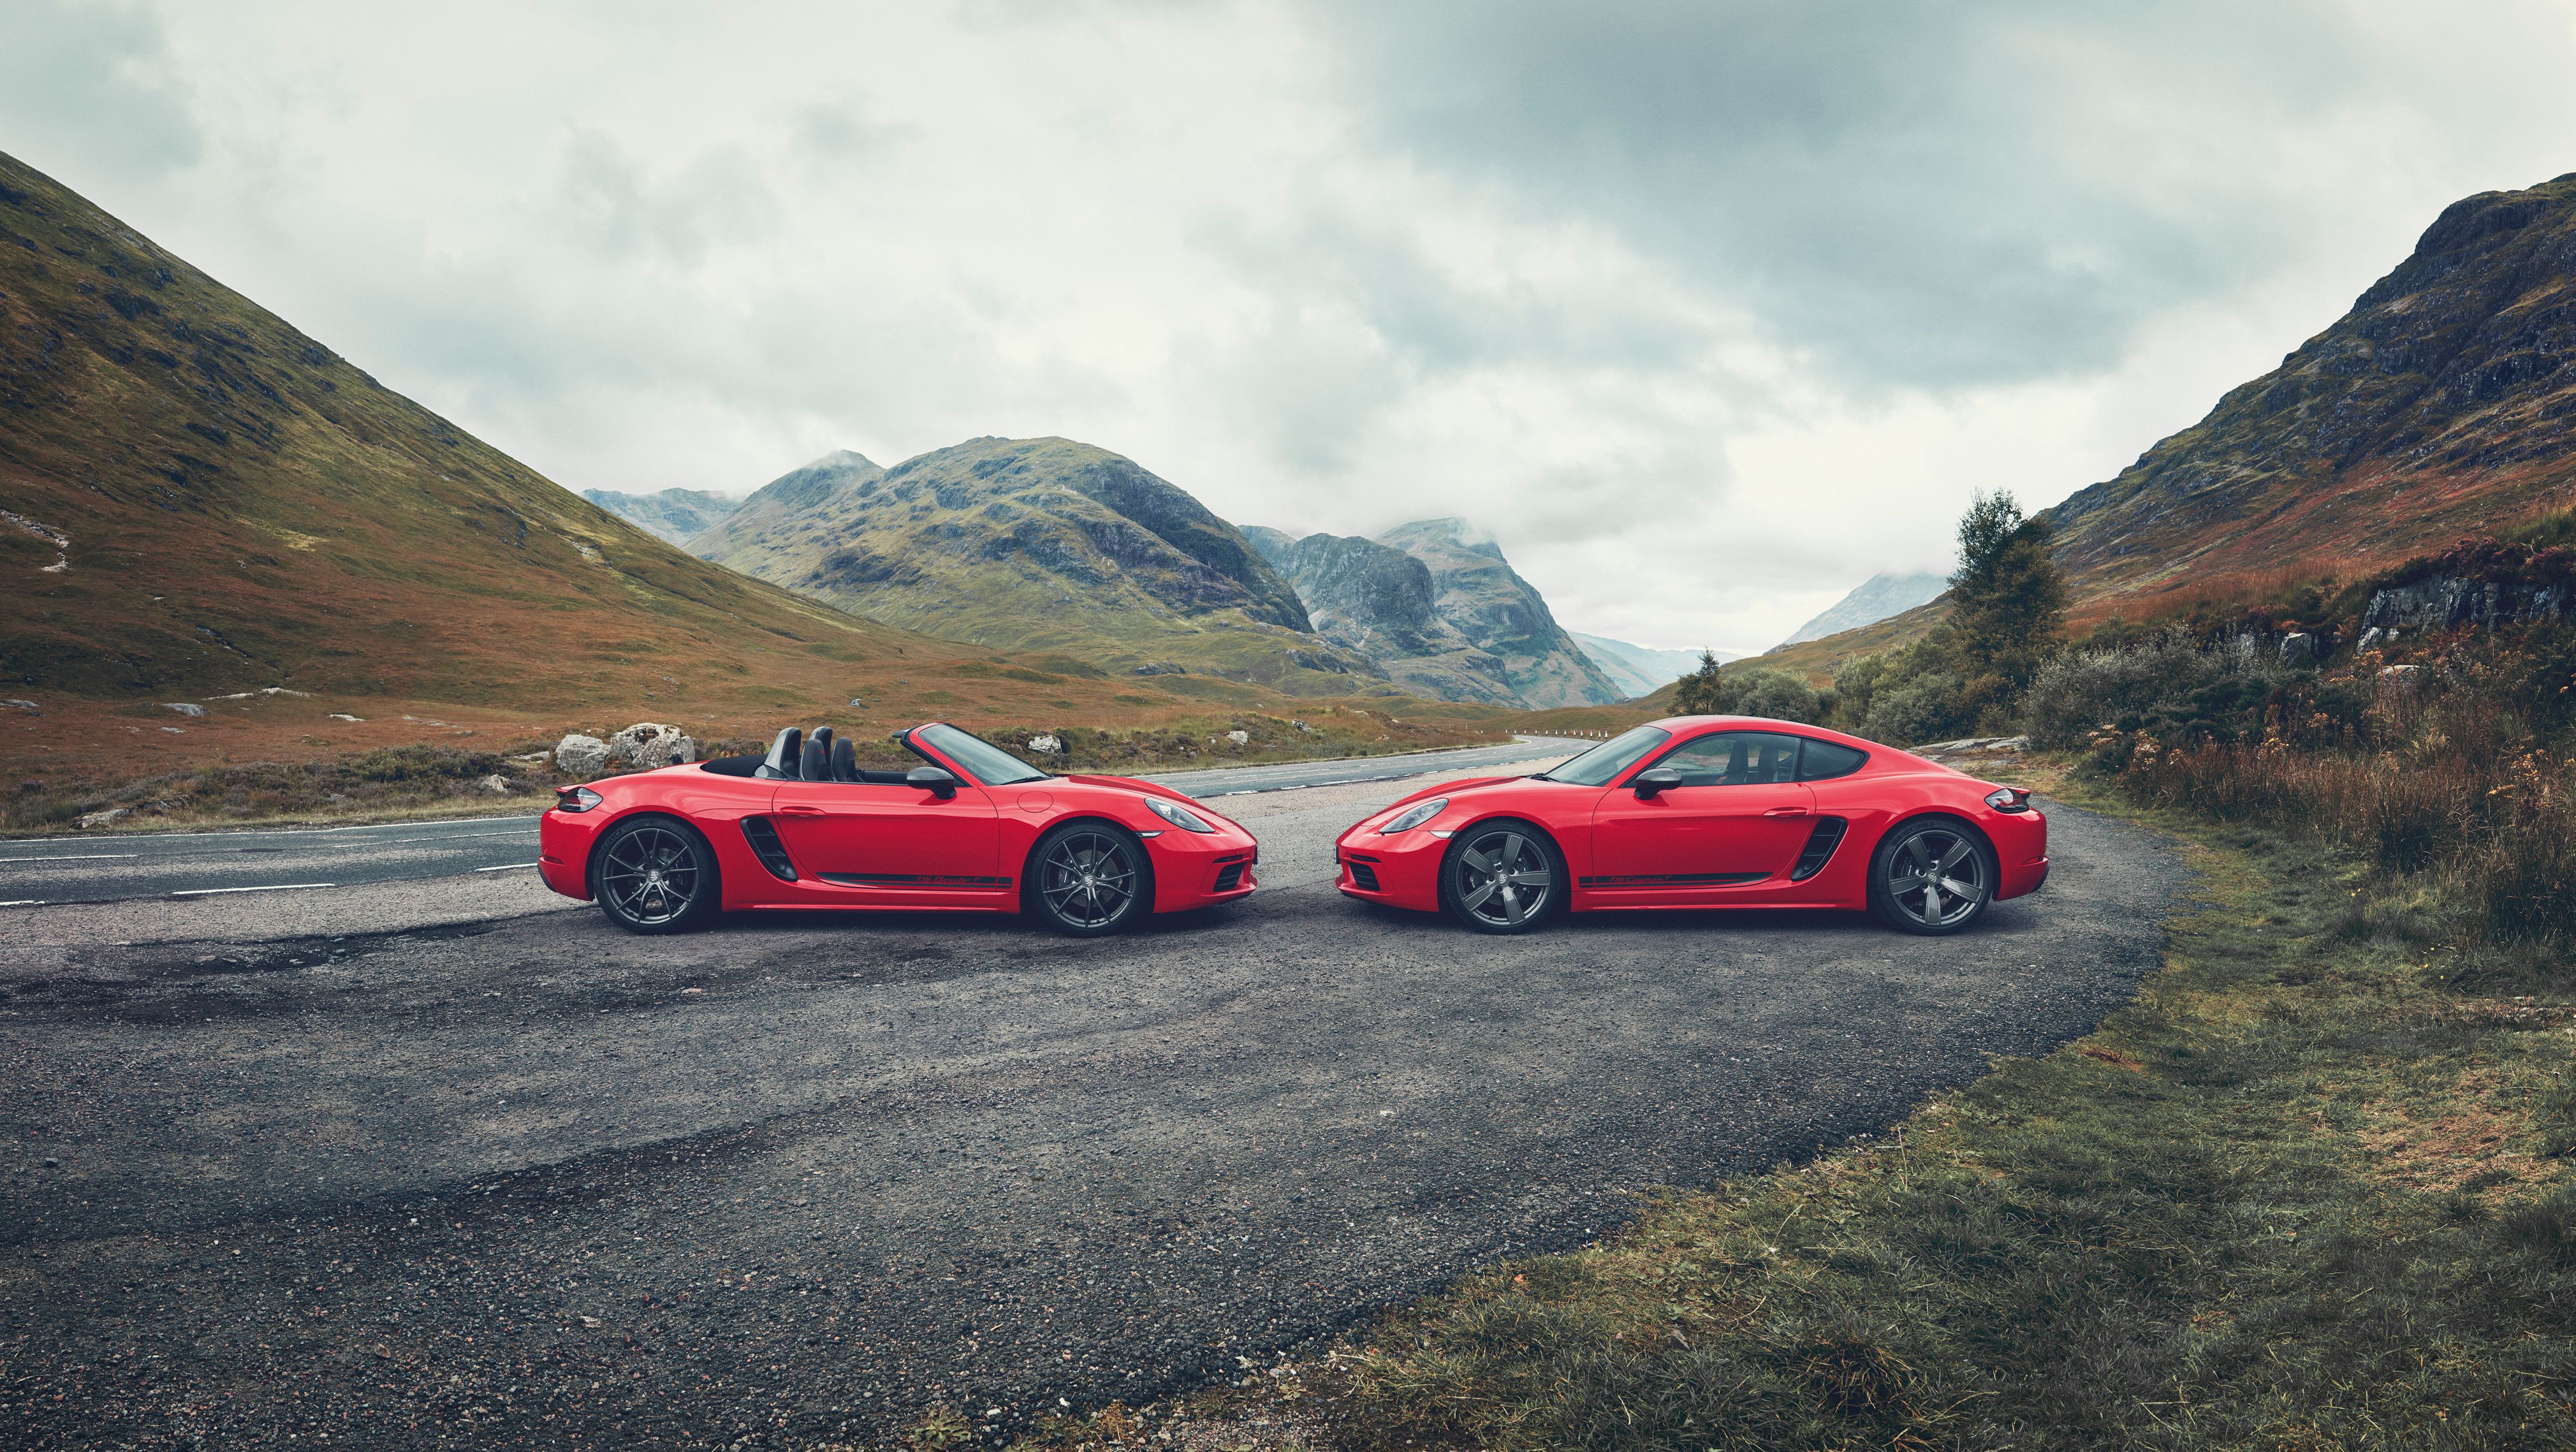 2018 If You Like to Keep it Simple, the 2019 Porsche 718 Cayman T or 718 Boxster T Might be for You